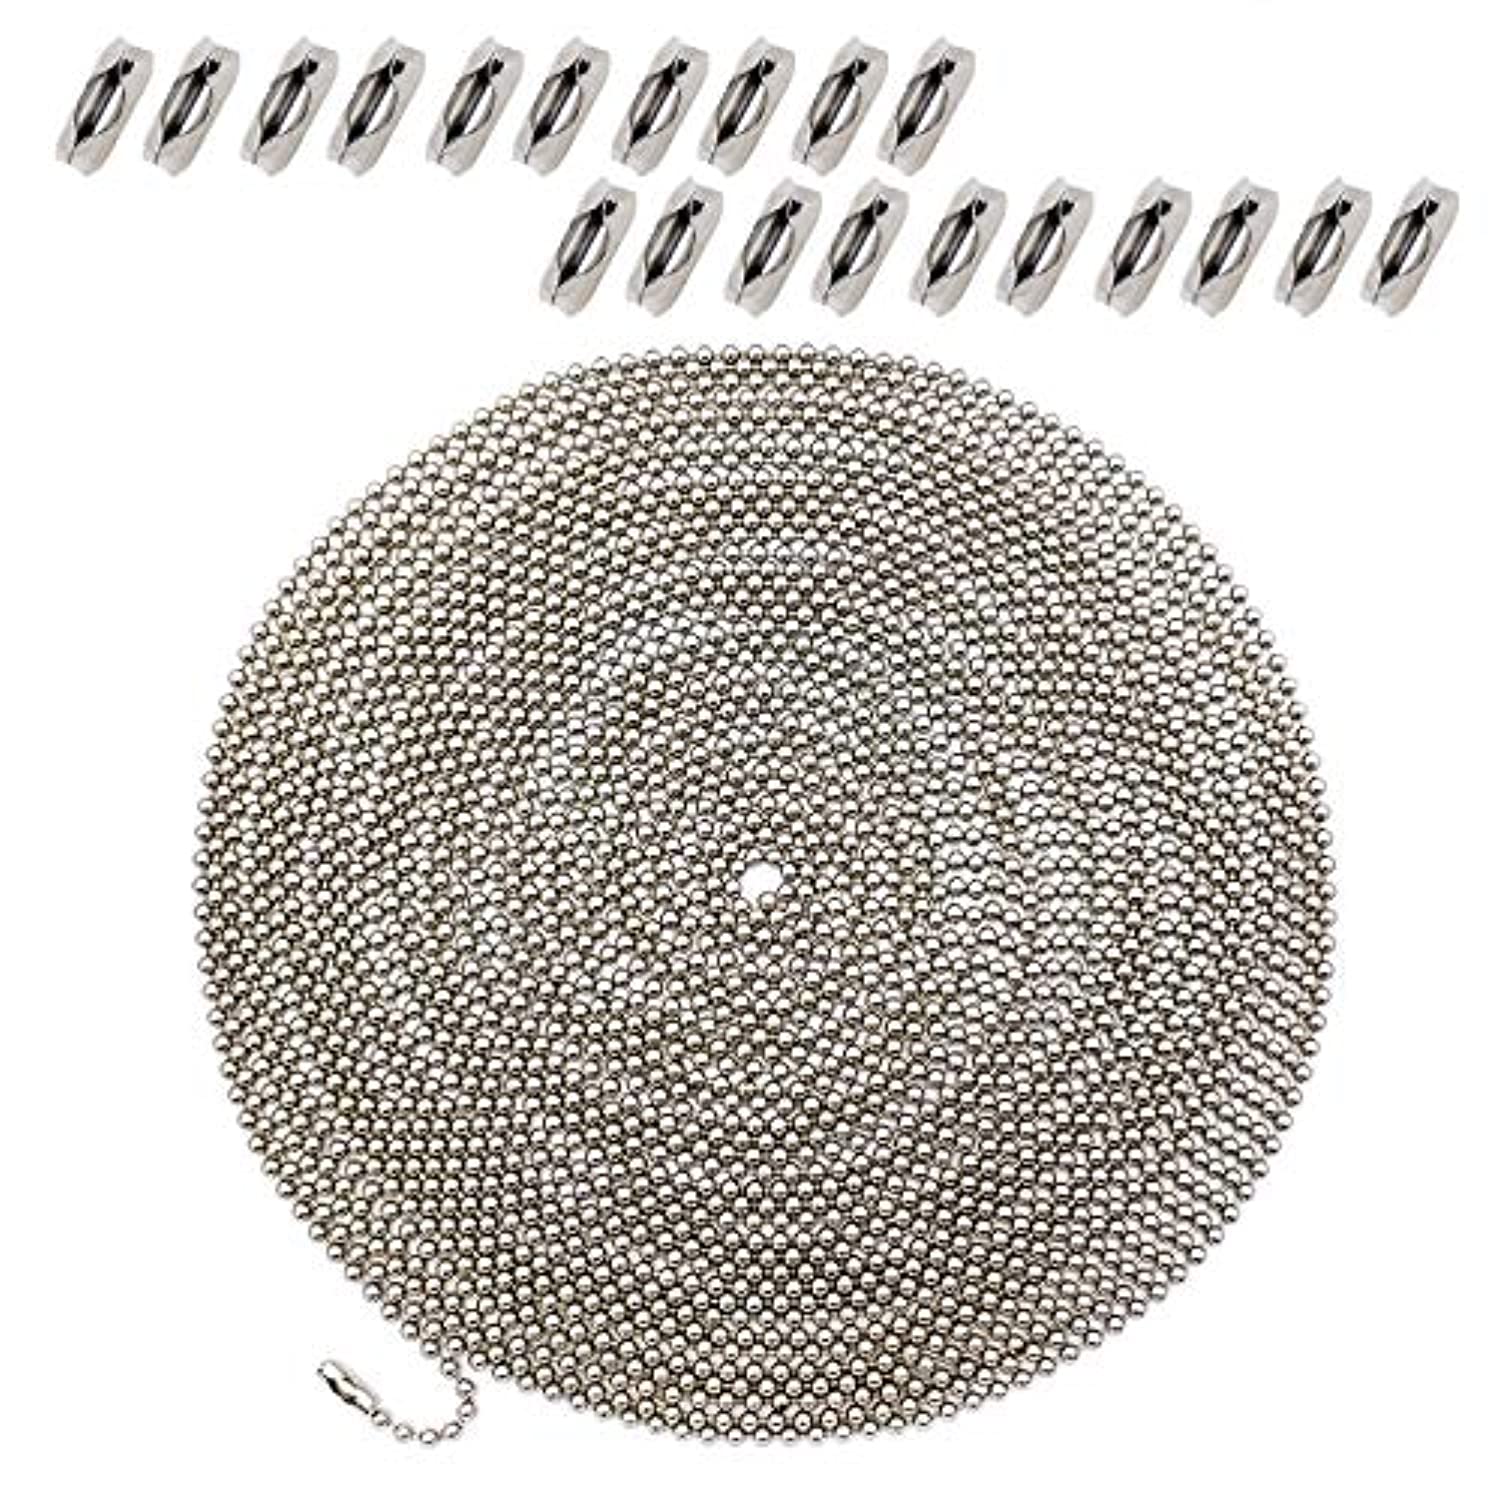 32 Feet Beaded Pull Chain Extension, Fan Ceiling Extenders with 40